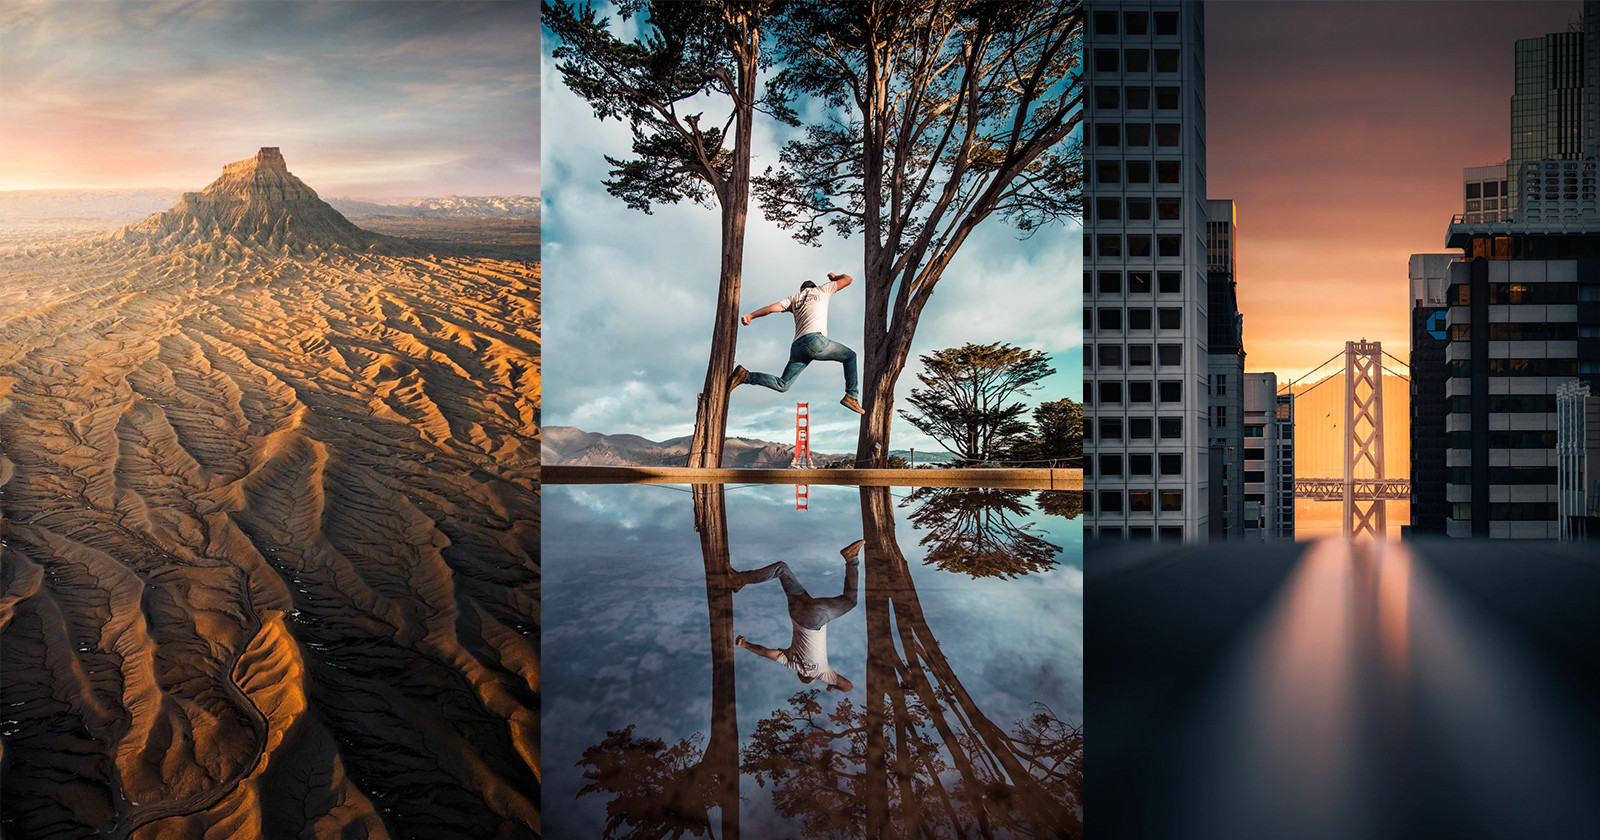 8 Ways Storytelling Can Improve Your Photos and Videos